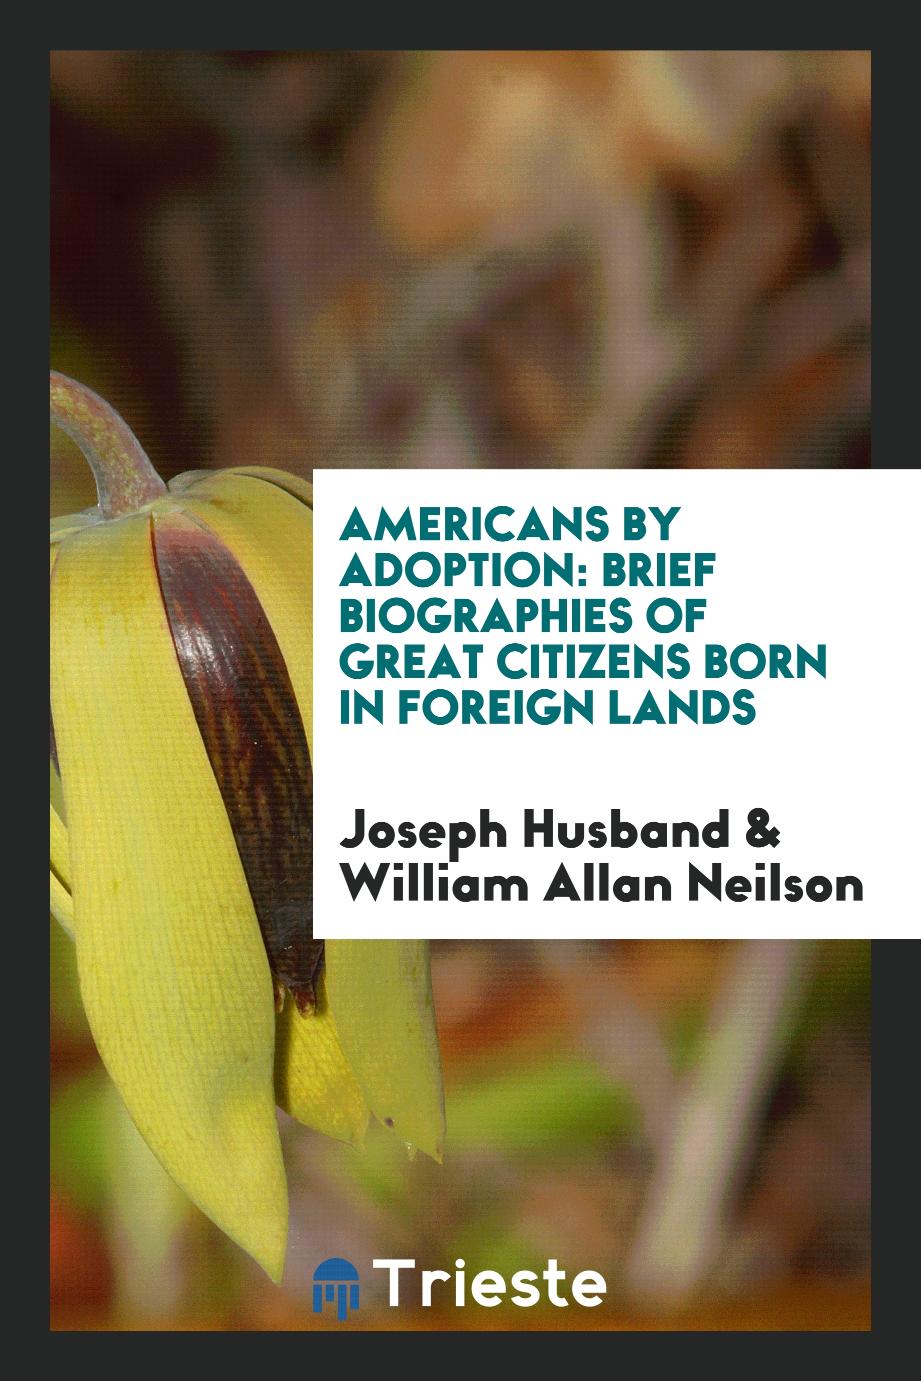 Americans by Adoption: Brief Biographies of Great Citizens Born in Foreign Lands